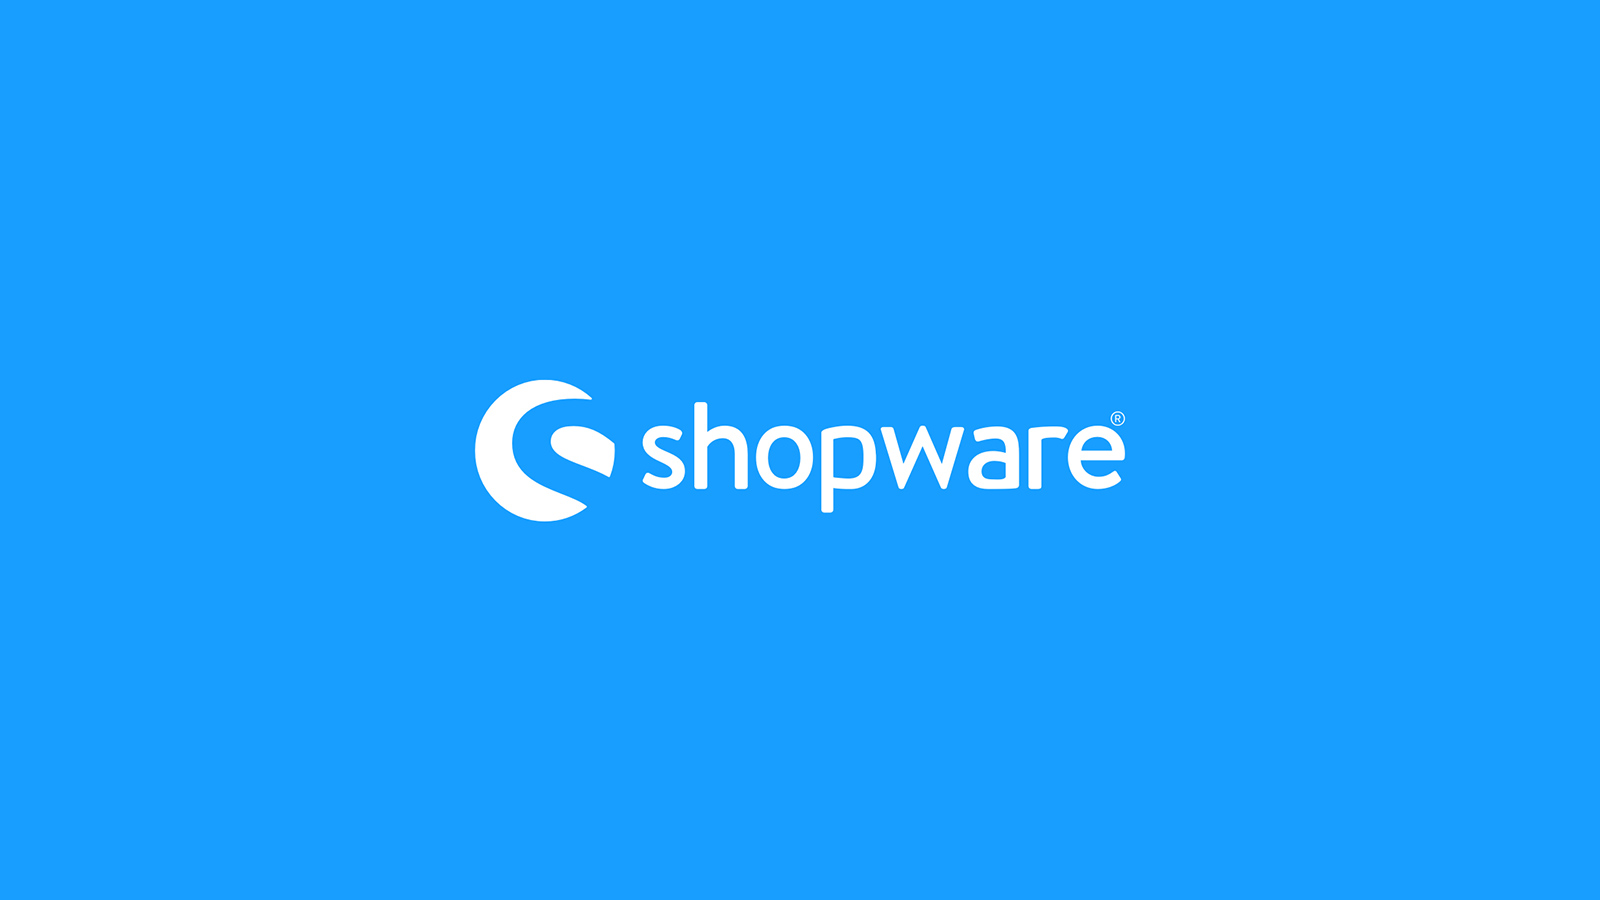 You can now also connect Retino to e-shops on the Shopware platform